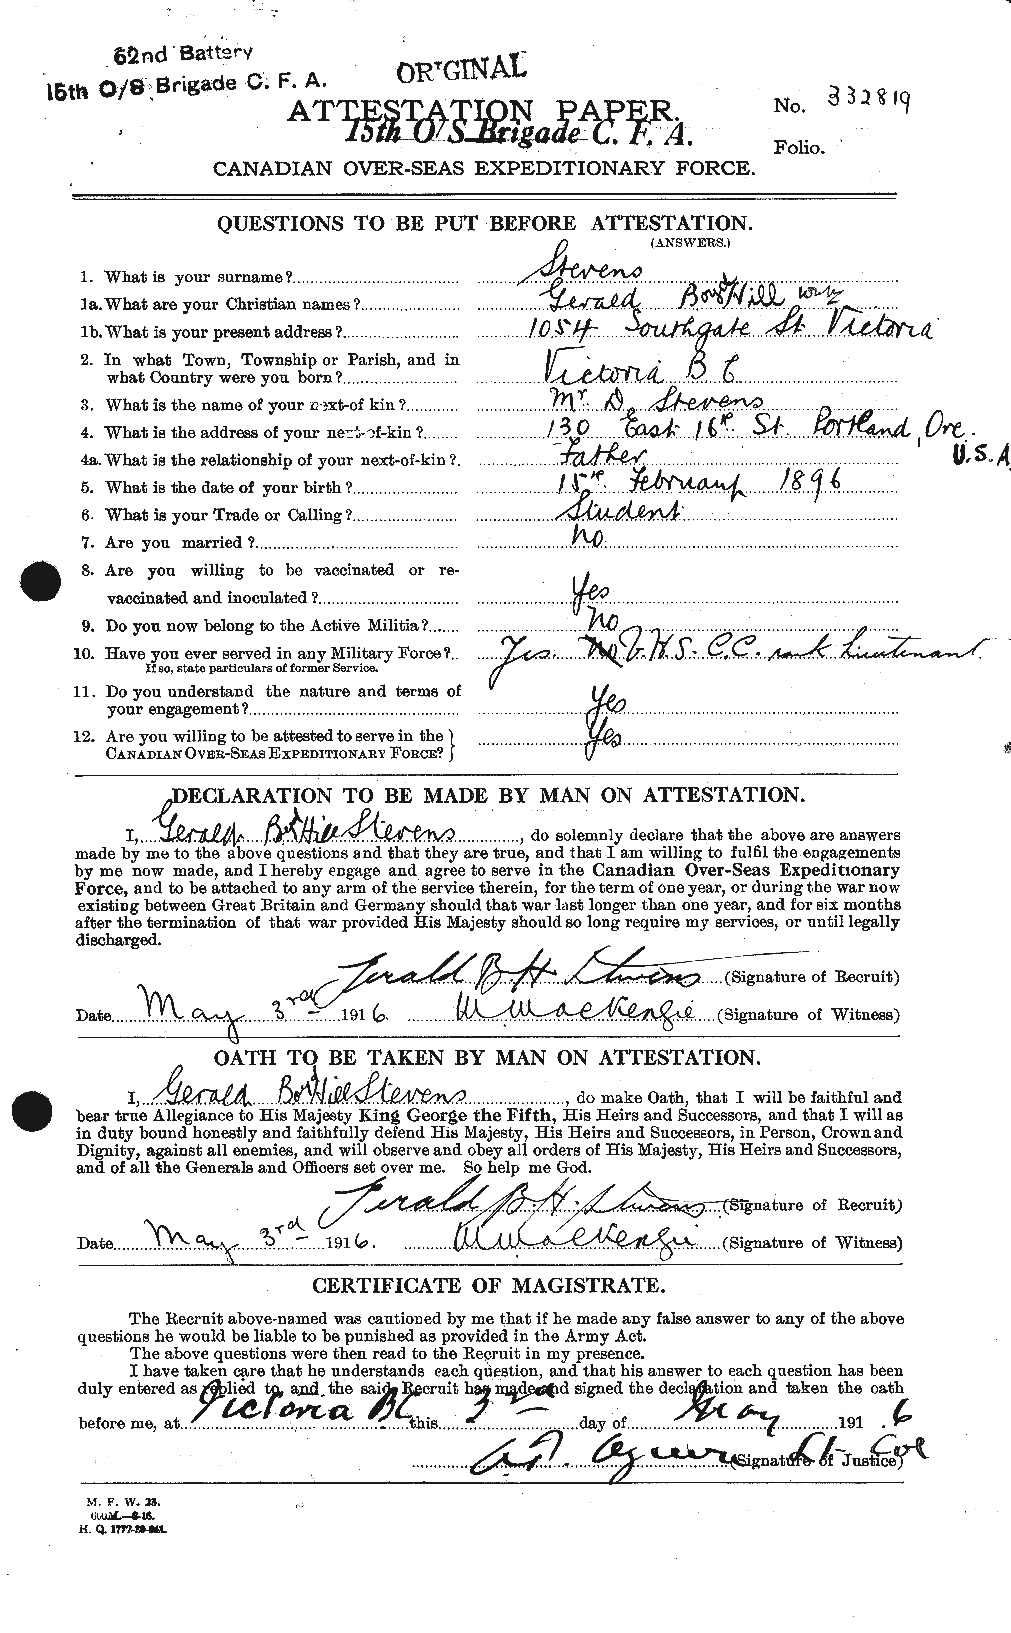 Personnel Records of the First World War - CEF 119576a